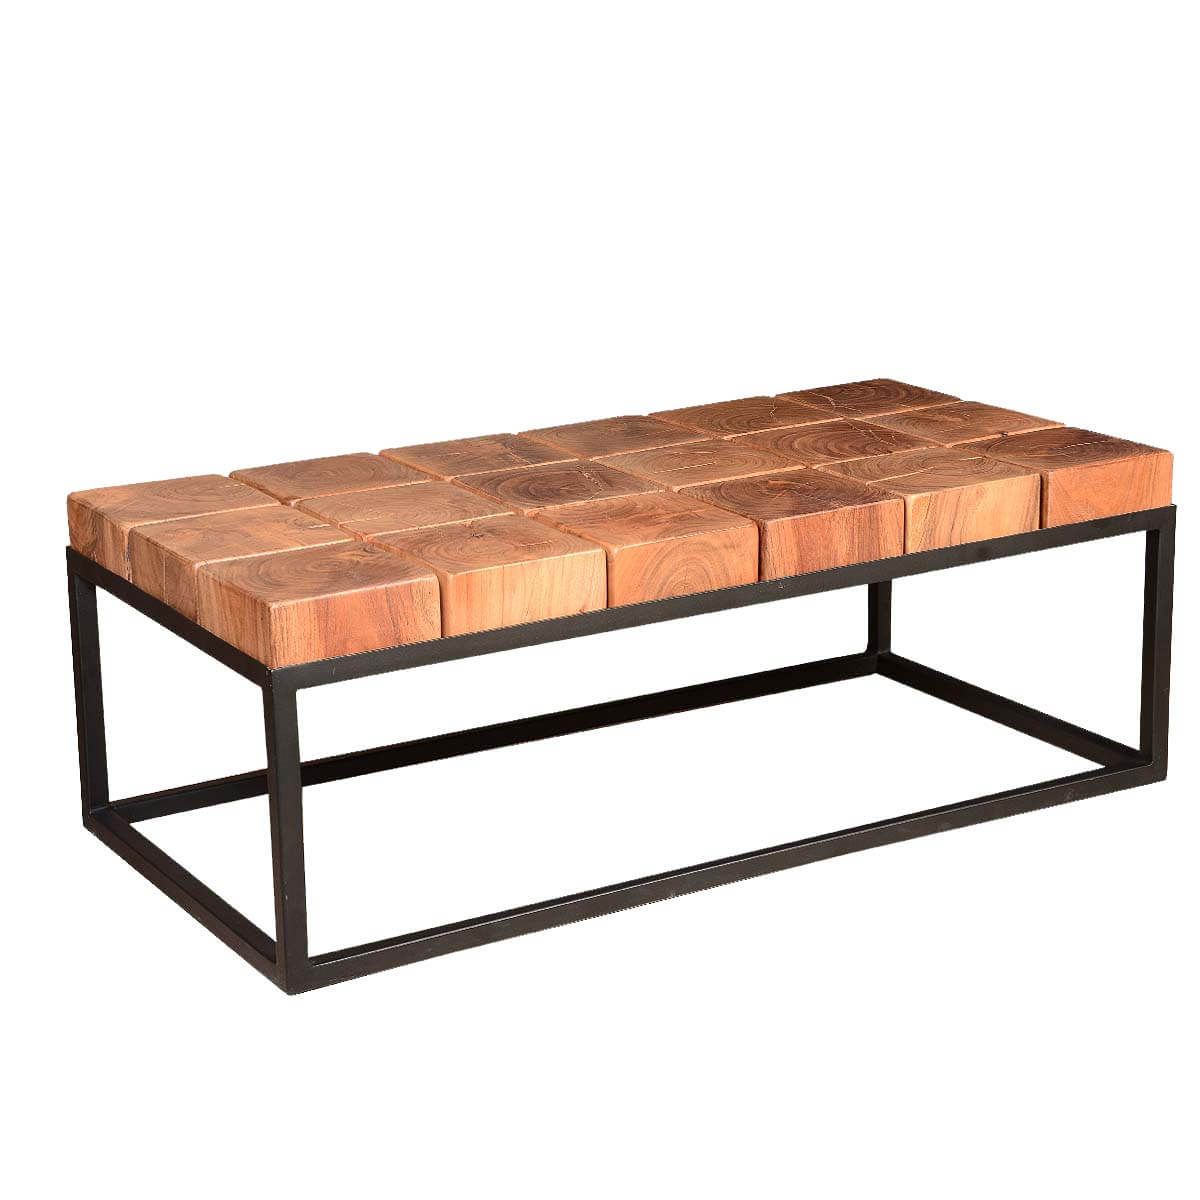 Solid Acacia Wood Block Contemporary Iron Base Rustic Coffee Table In Latest Solid Acacia Wood Coffee Tables (View 6 of 20)